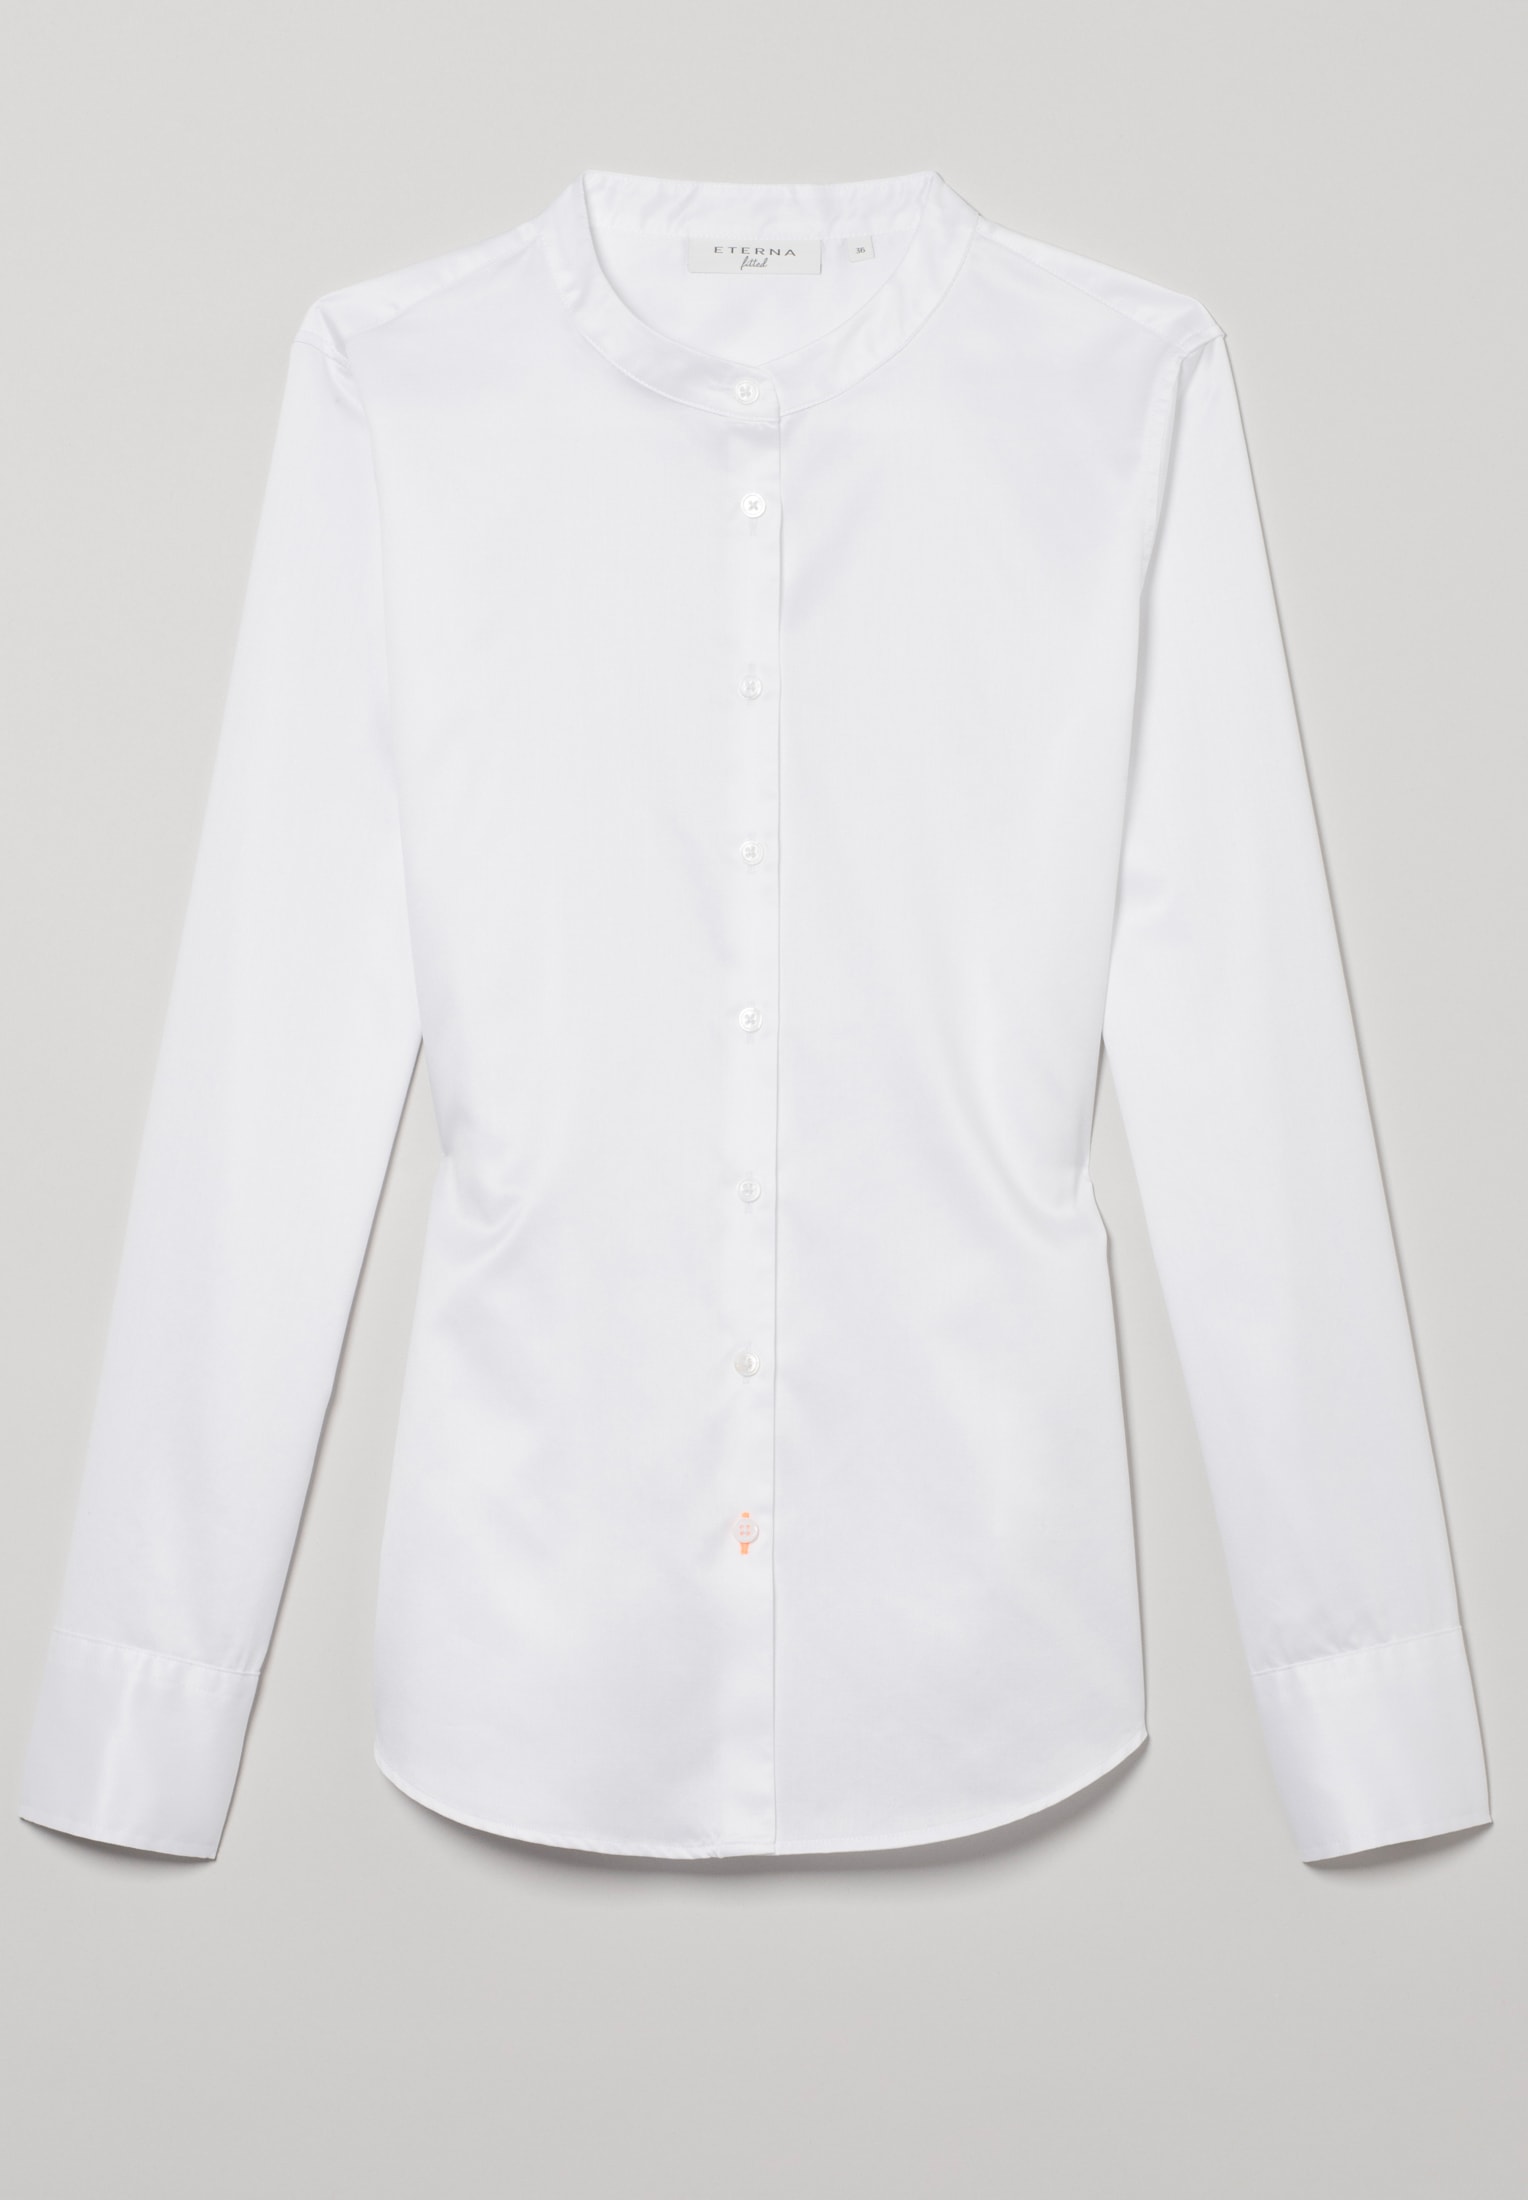 Soft Luxury Shirt 2BL03742-00-02-38-1/1 | Bluse Langarm | in 38 | off-white unifarben | off-white